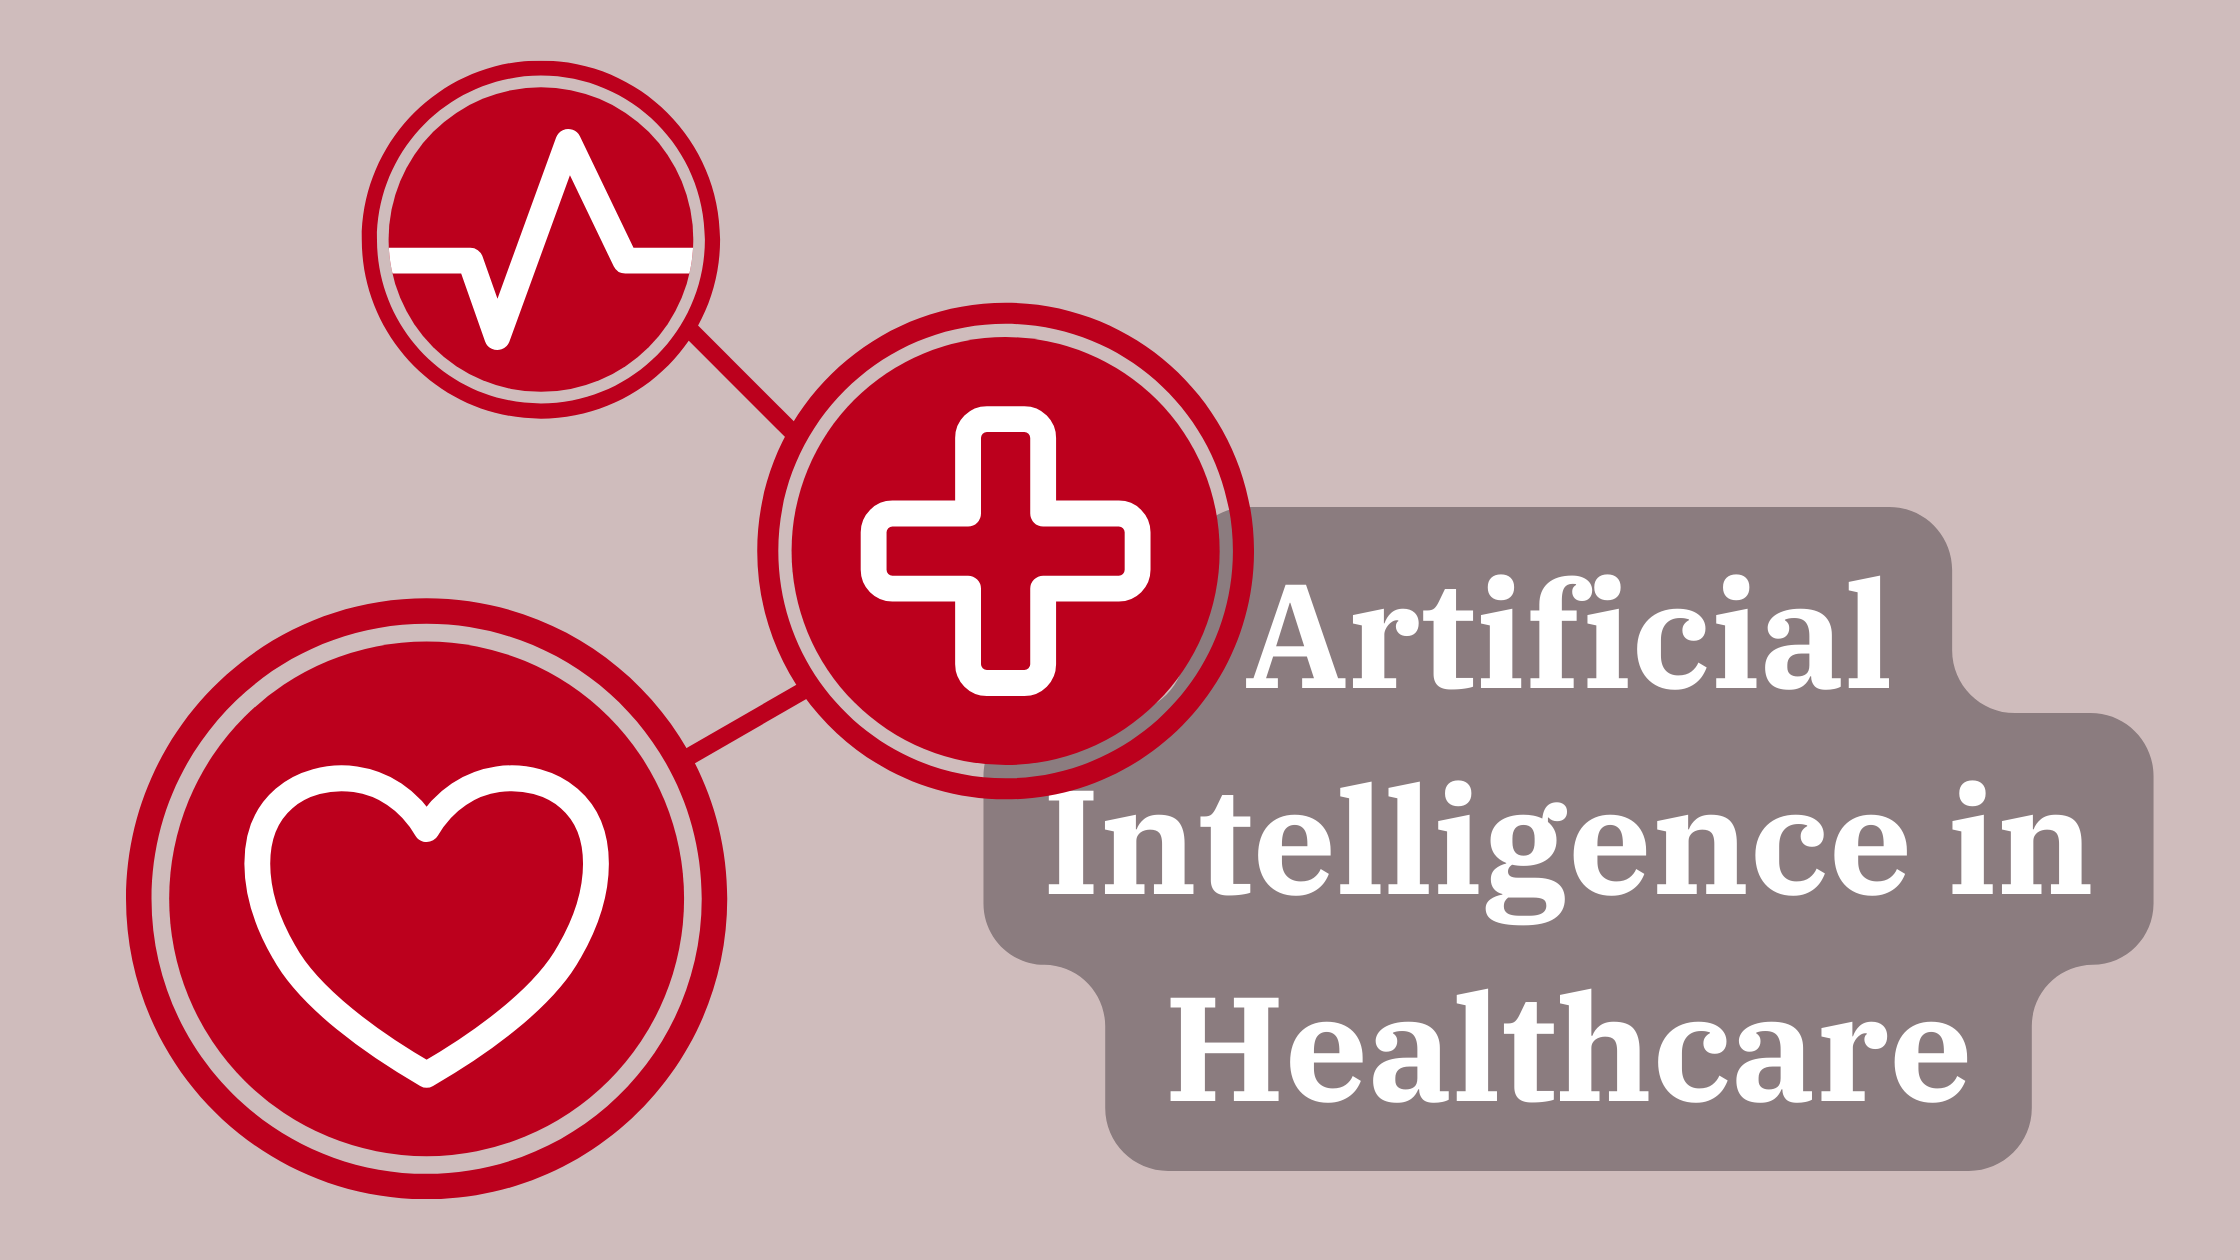 Role of Artificial Intelligence in Healthcare